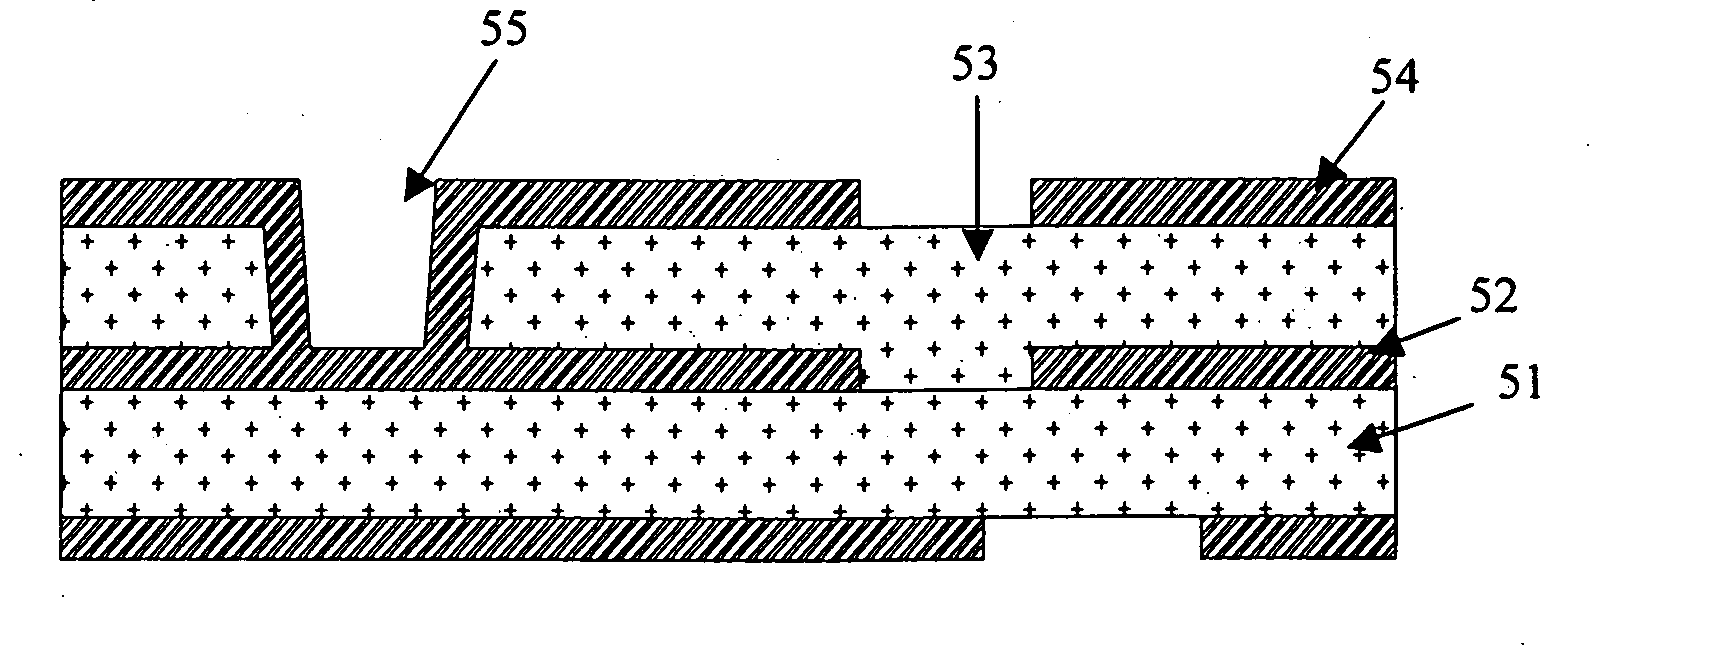 Methods of preparing printed circuit boards and packaging substrates of integrated circuit